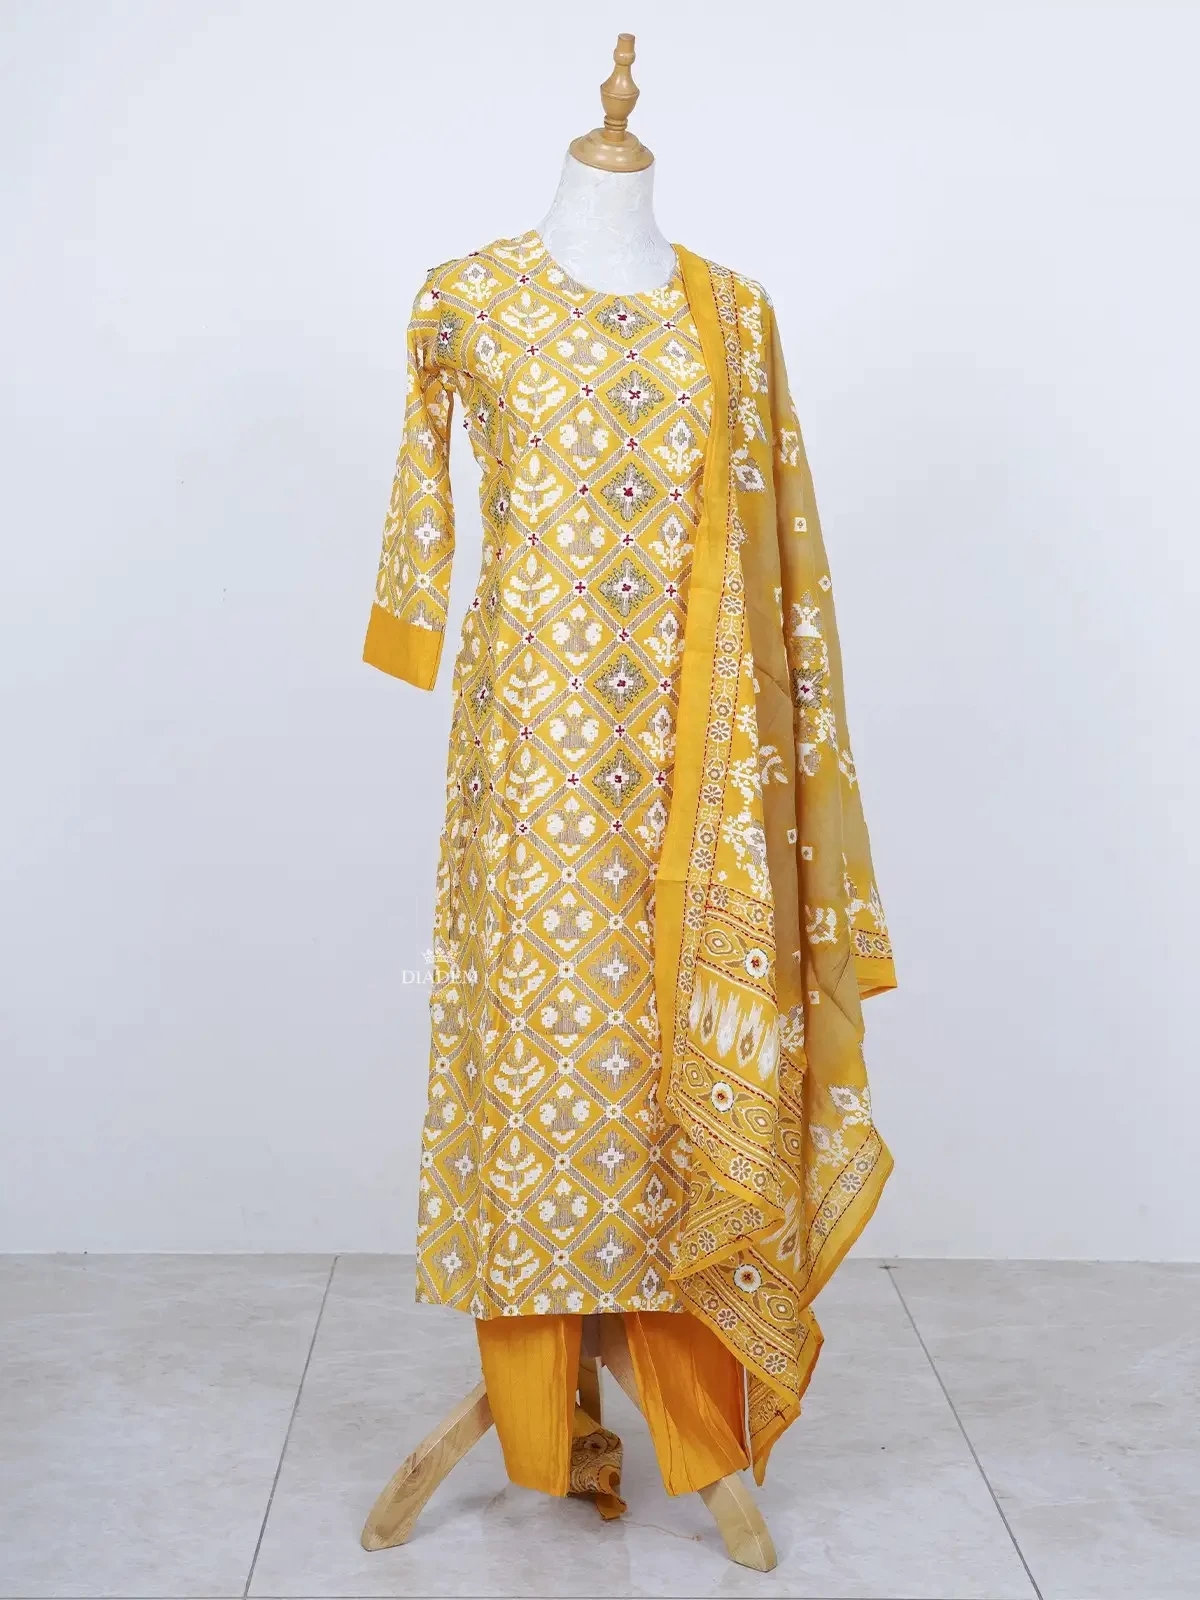 Chrome Yellow Ikkat Printed Cotton Palazzo Suit With Dupatta